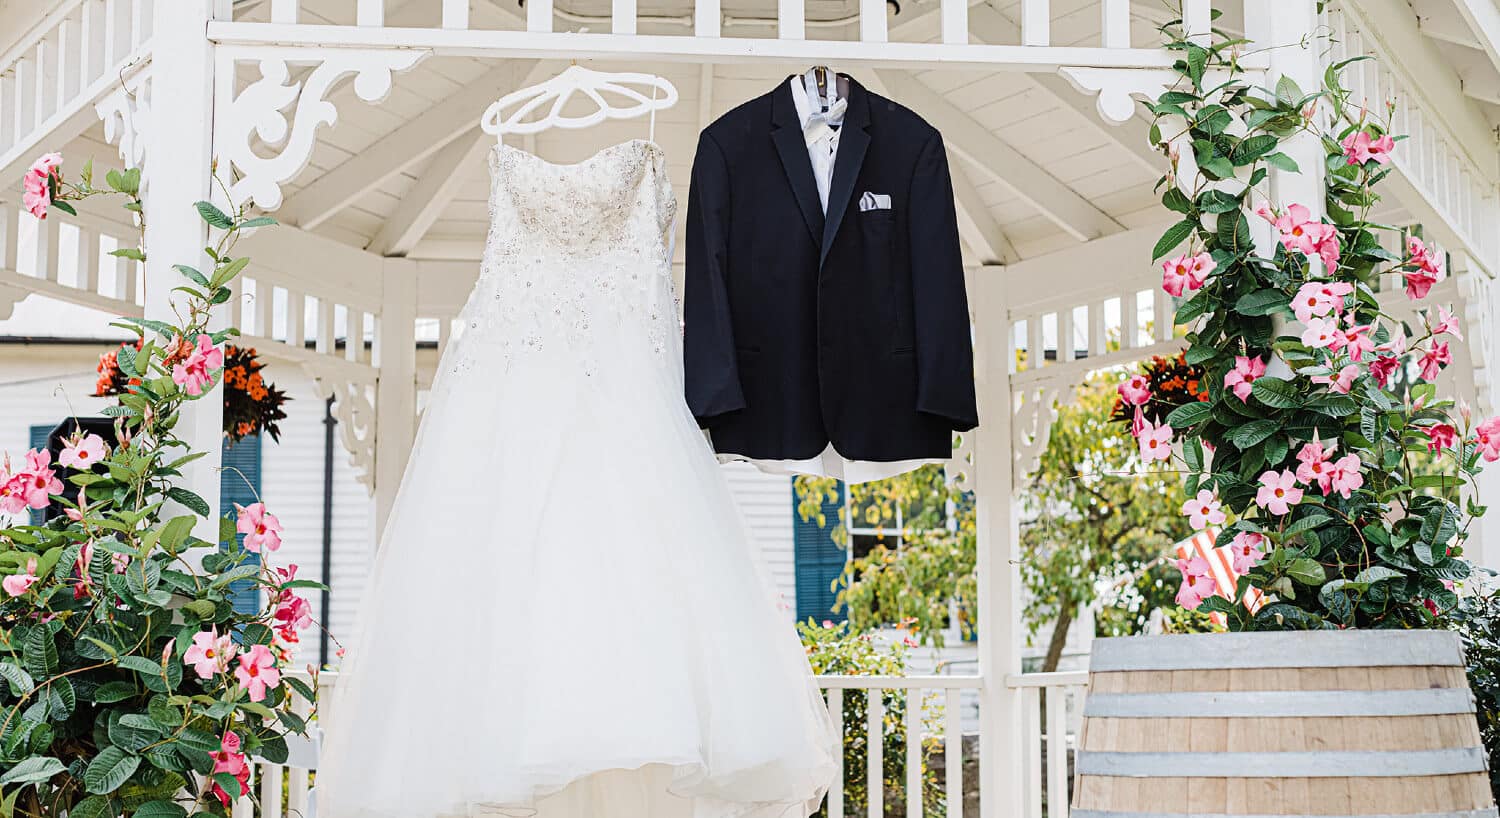 White lacy wedding gown and black tuxedo on hangers hanging from white gazebo. Pink potted flowers on each side of clothing.